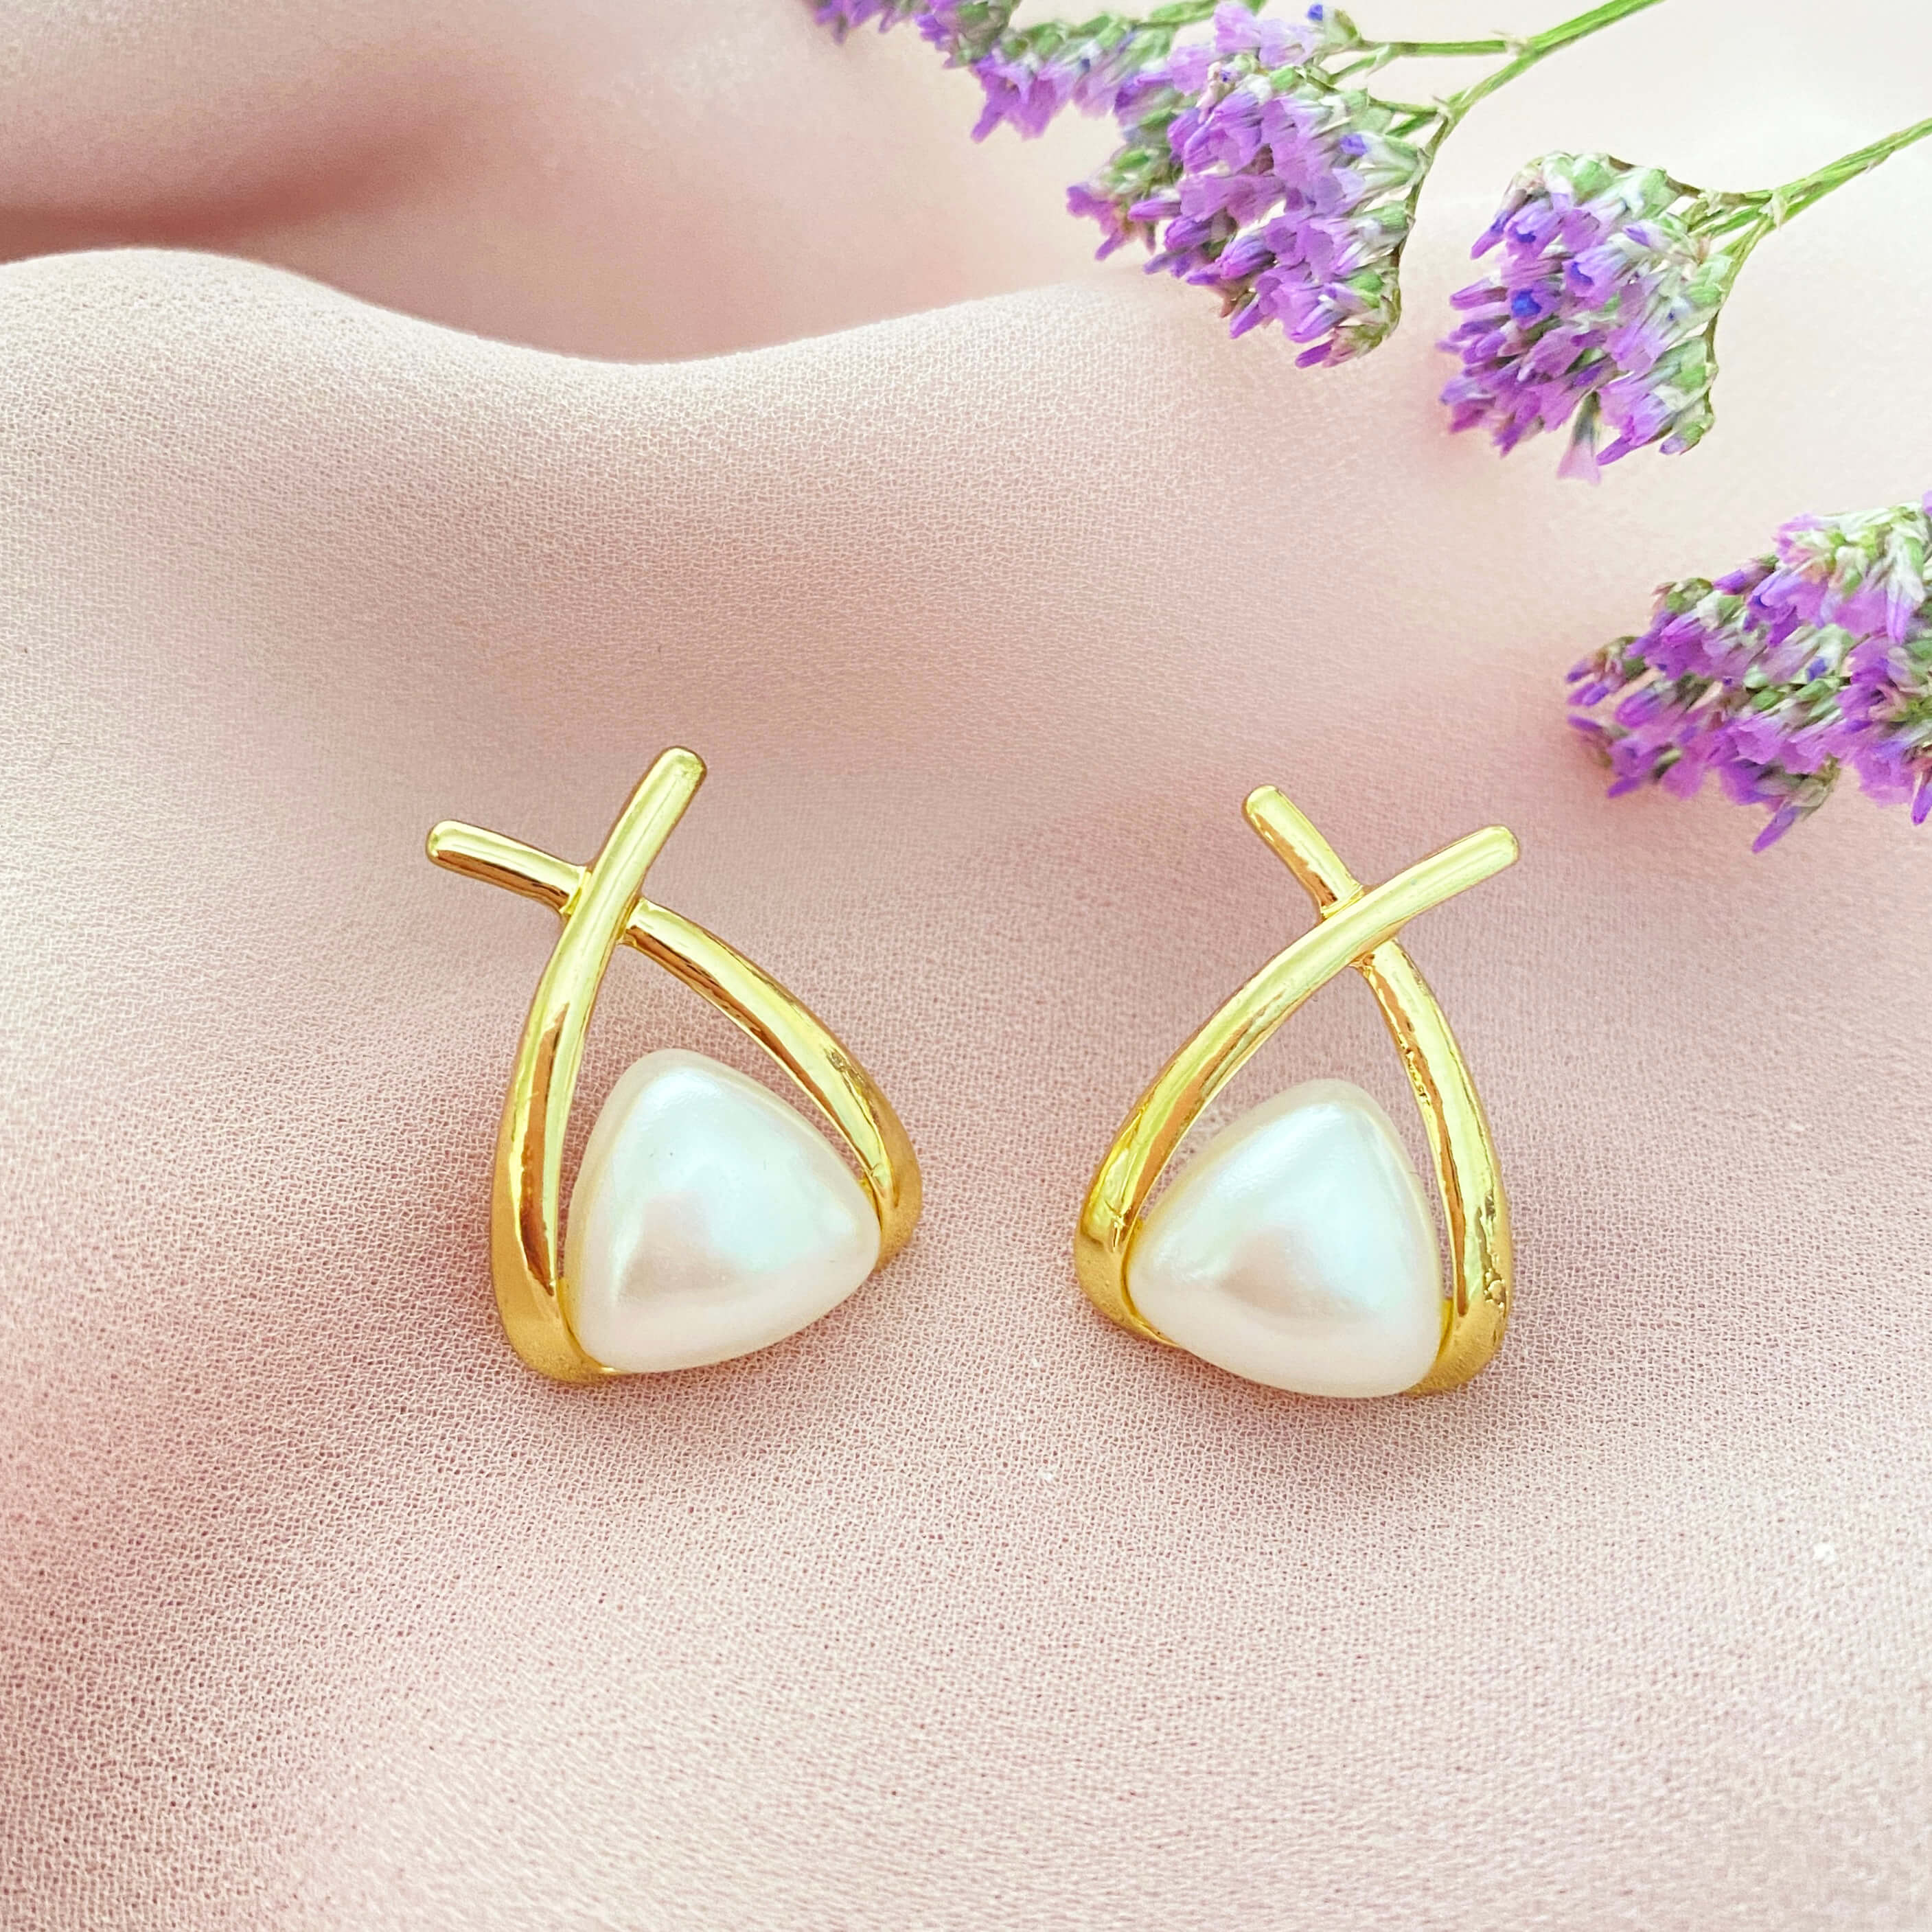 Buy Oomph Jewellery Small White Pearl Drop Earrings Online At Best Price @  Tata CLiQ